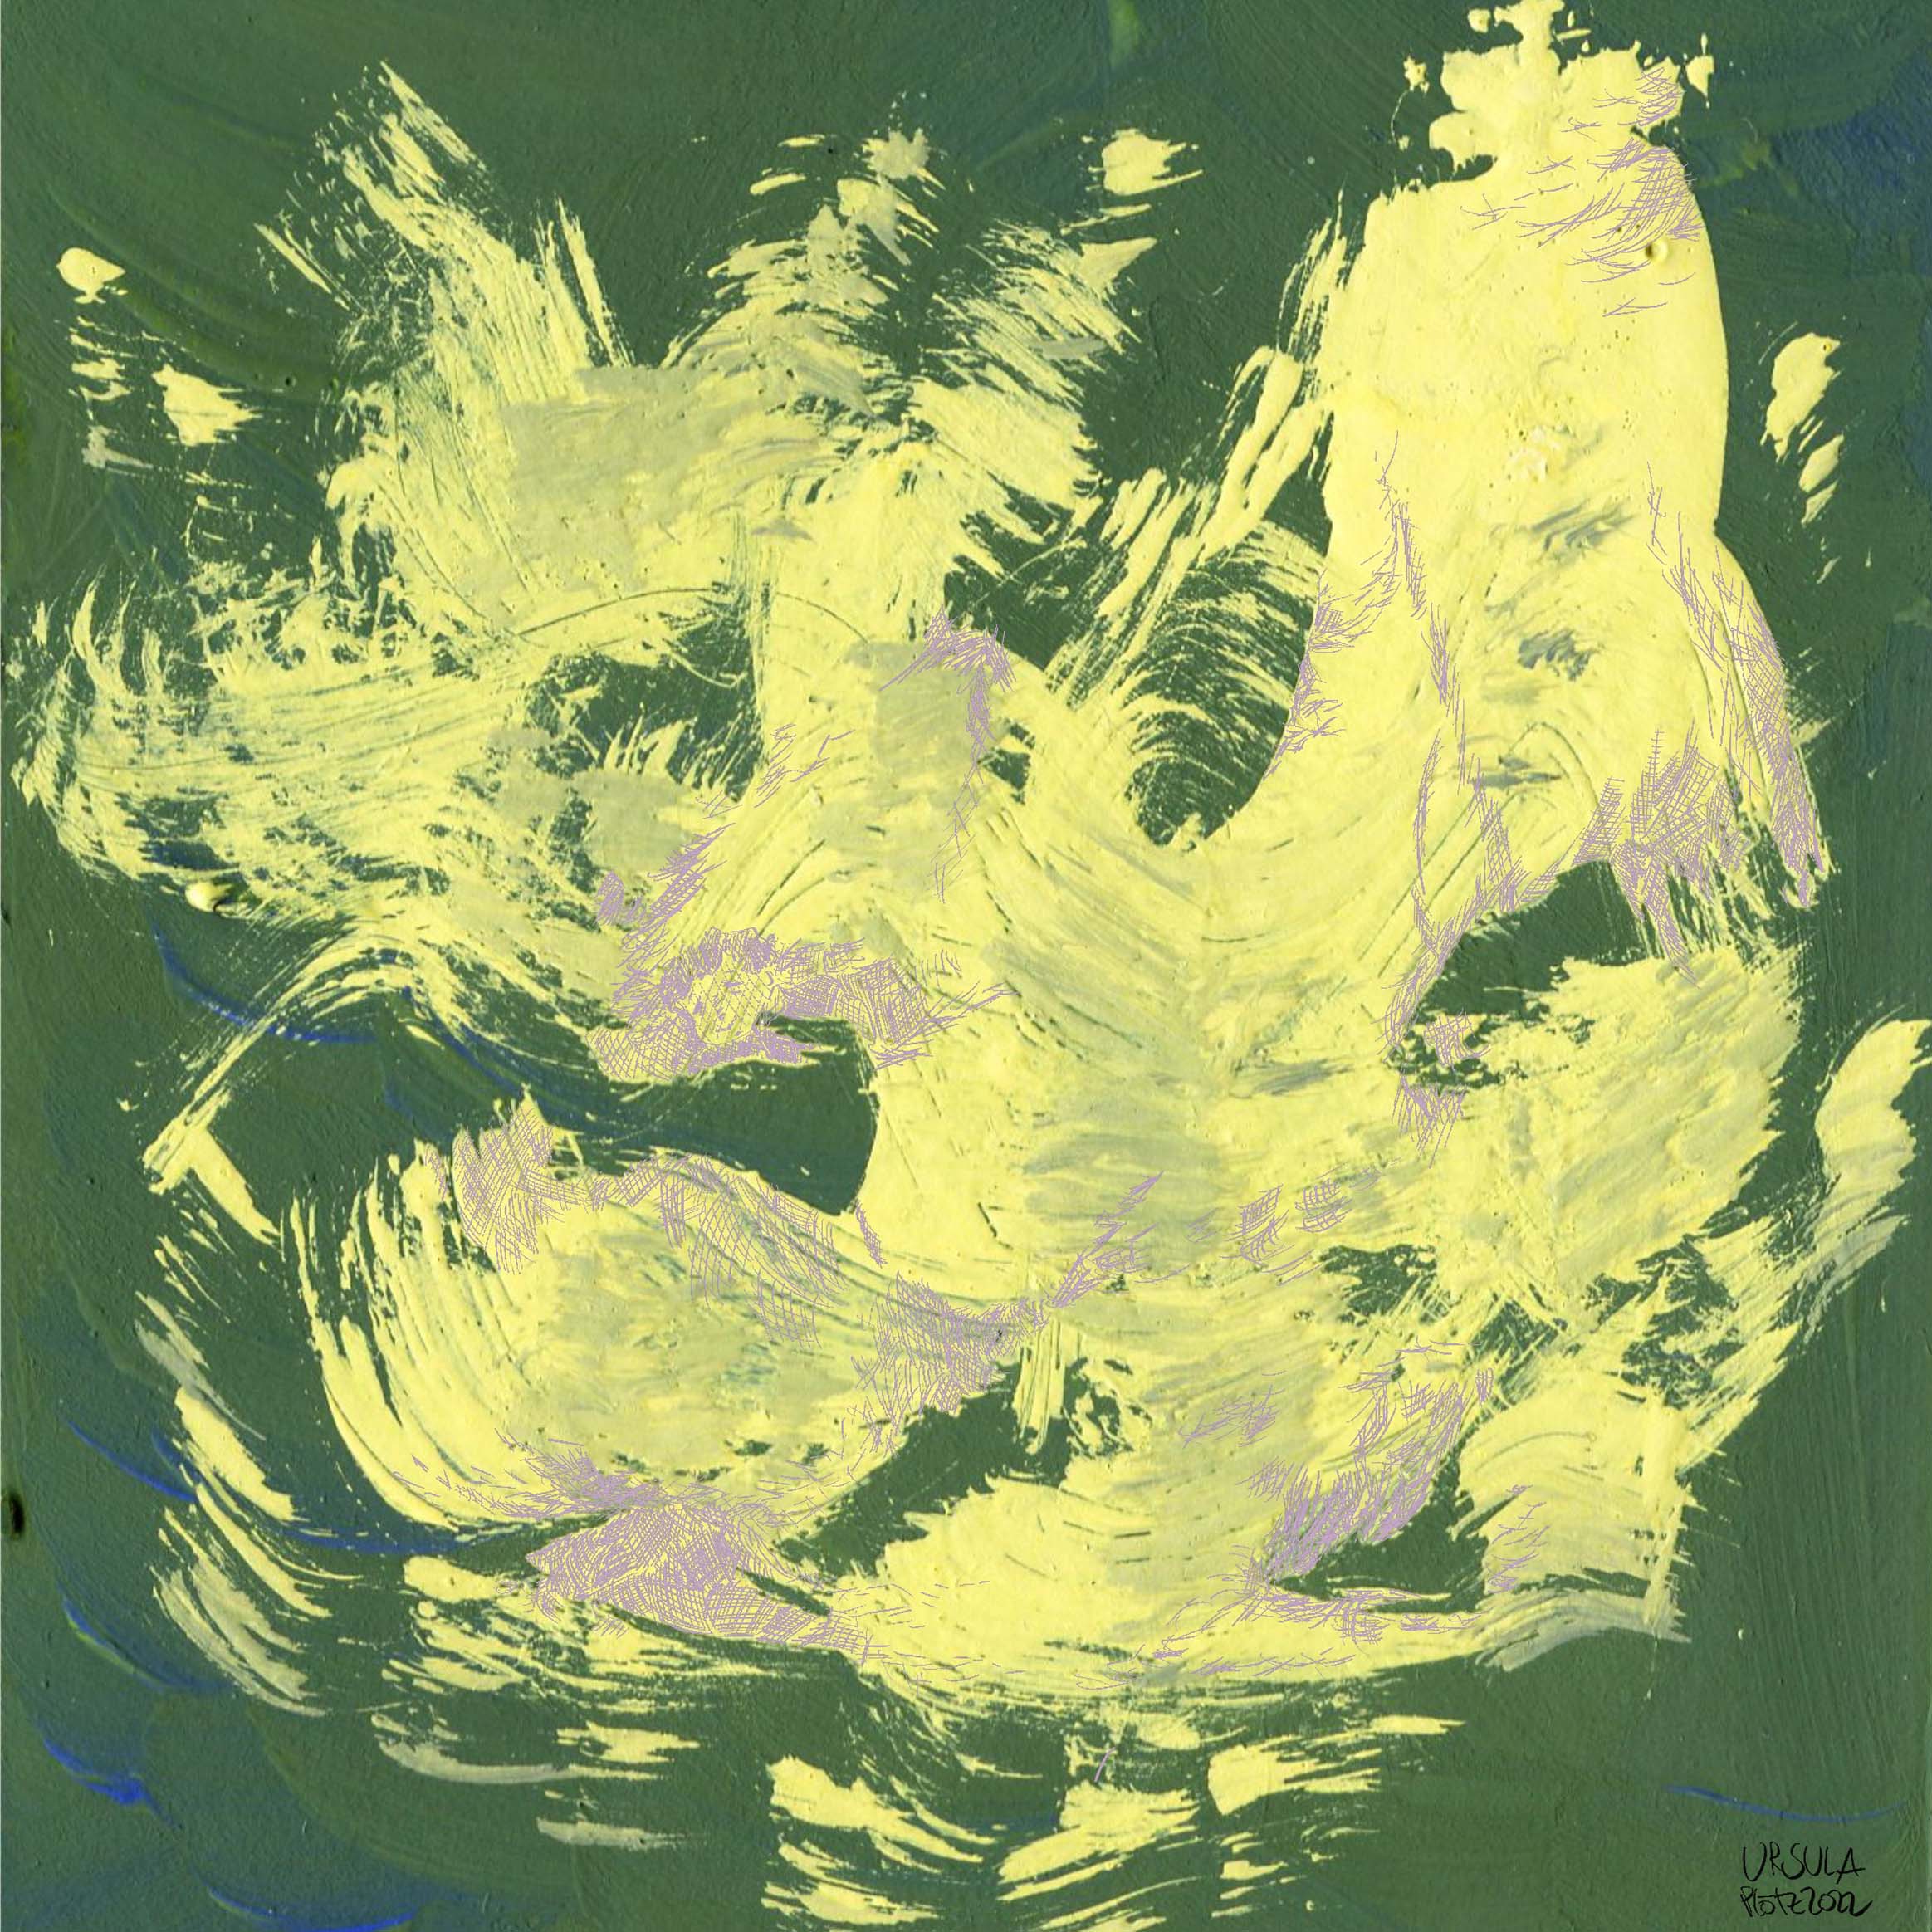 Yellow free form on dark green background (gouache) with pale lilac cross-hatched lines and tired face (digital)